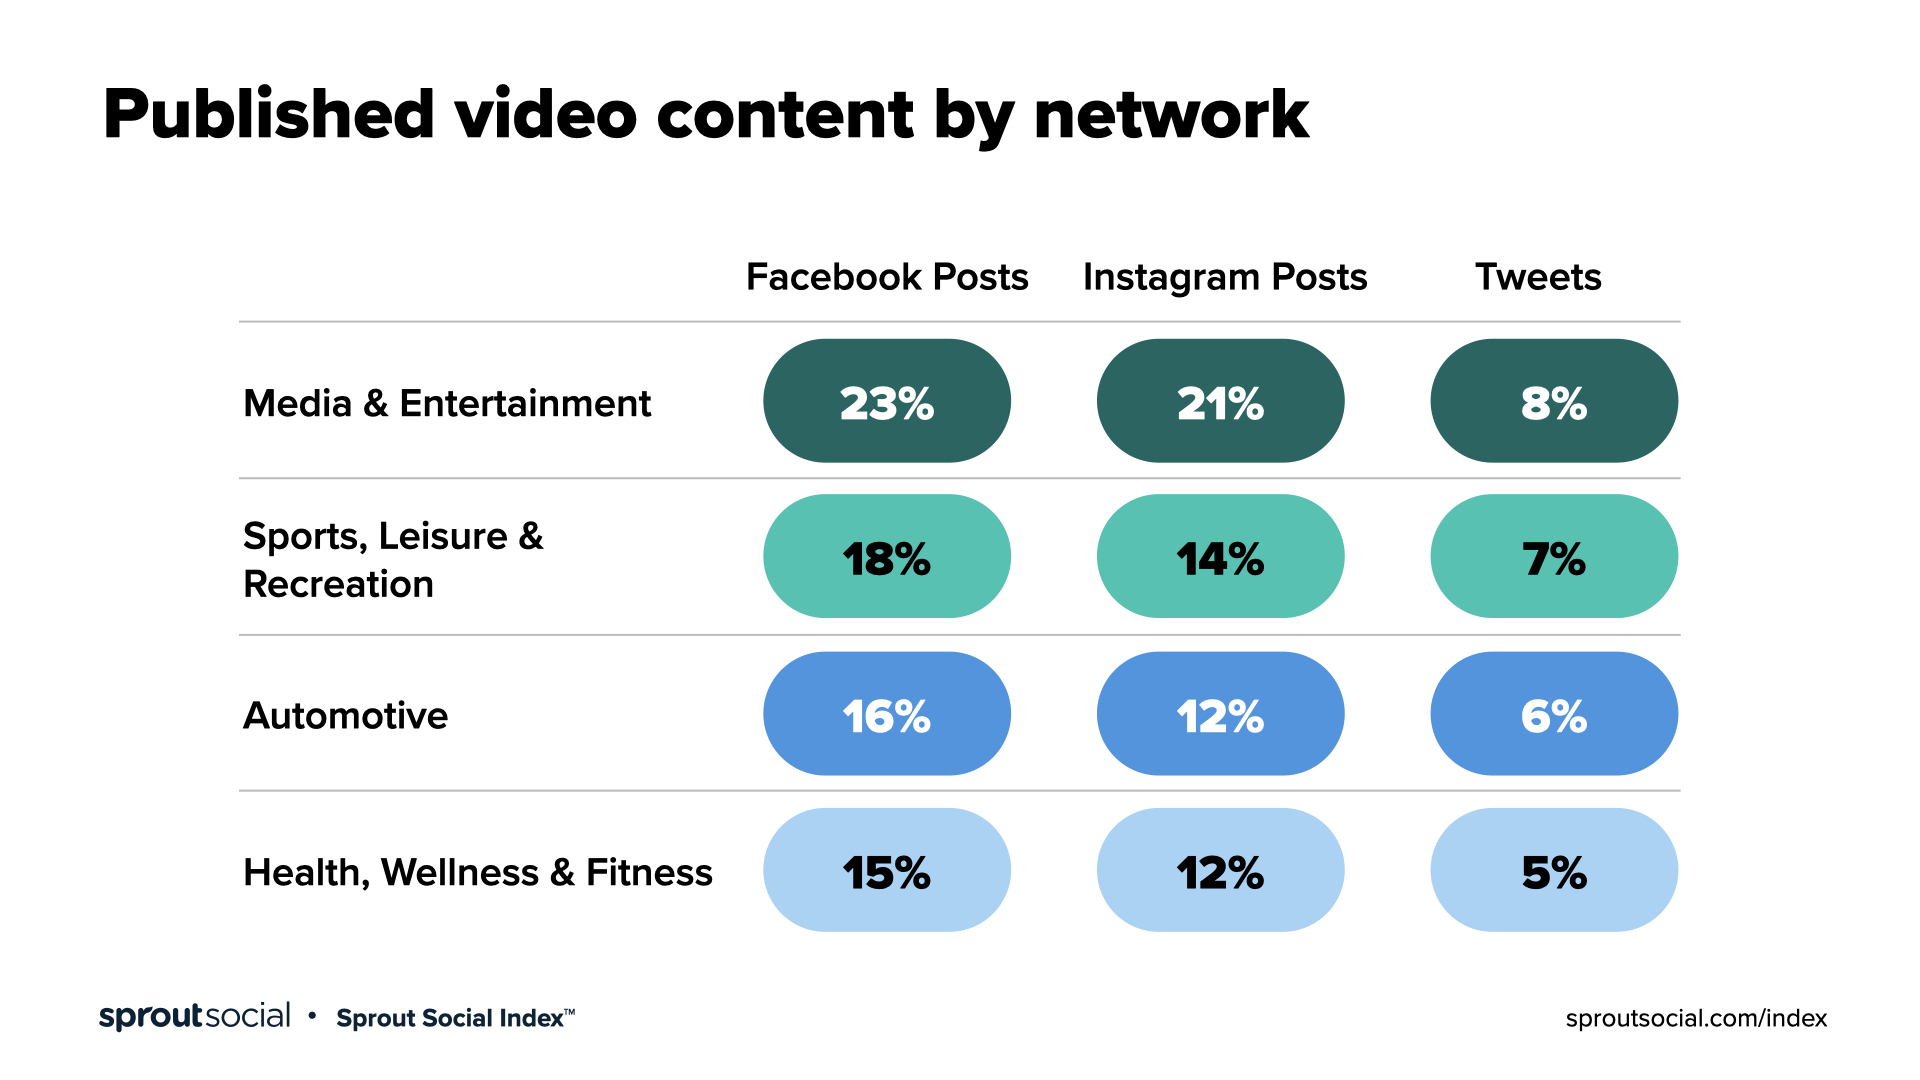 published video content by network, showing the most content published on FB and IG by media brands